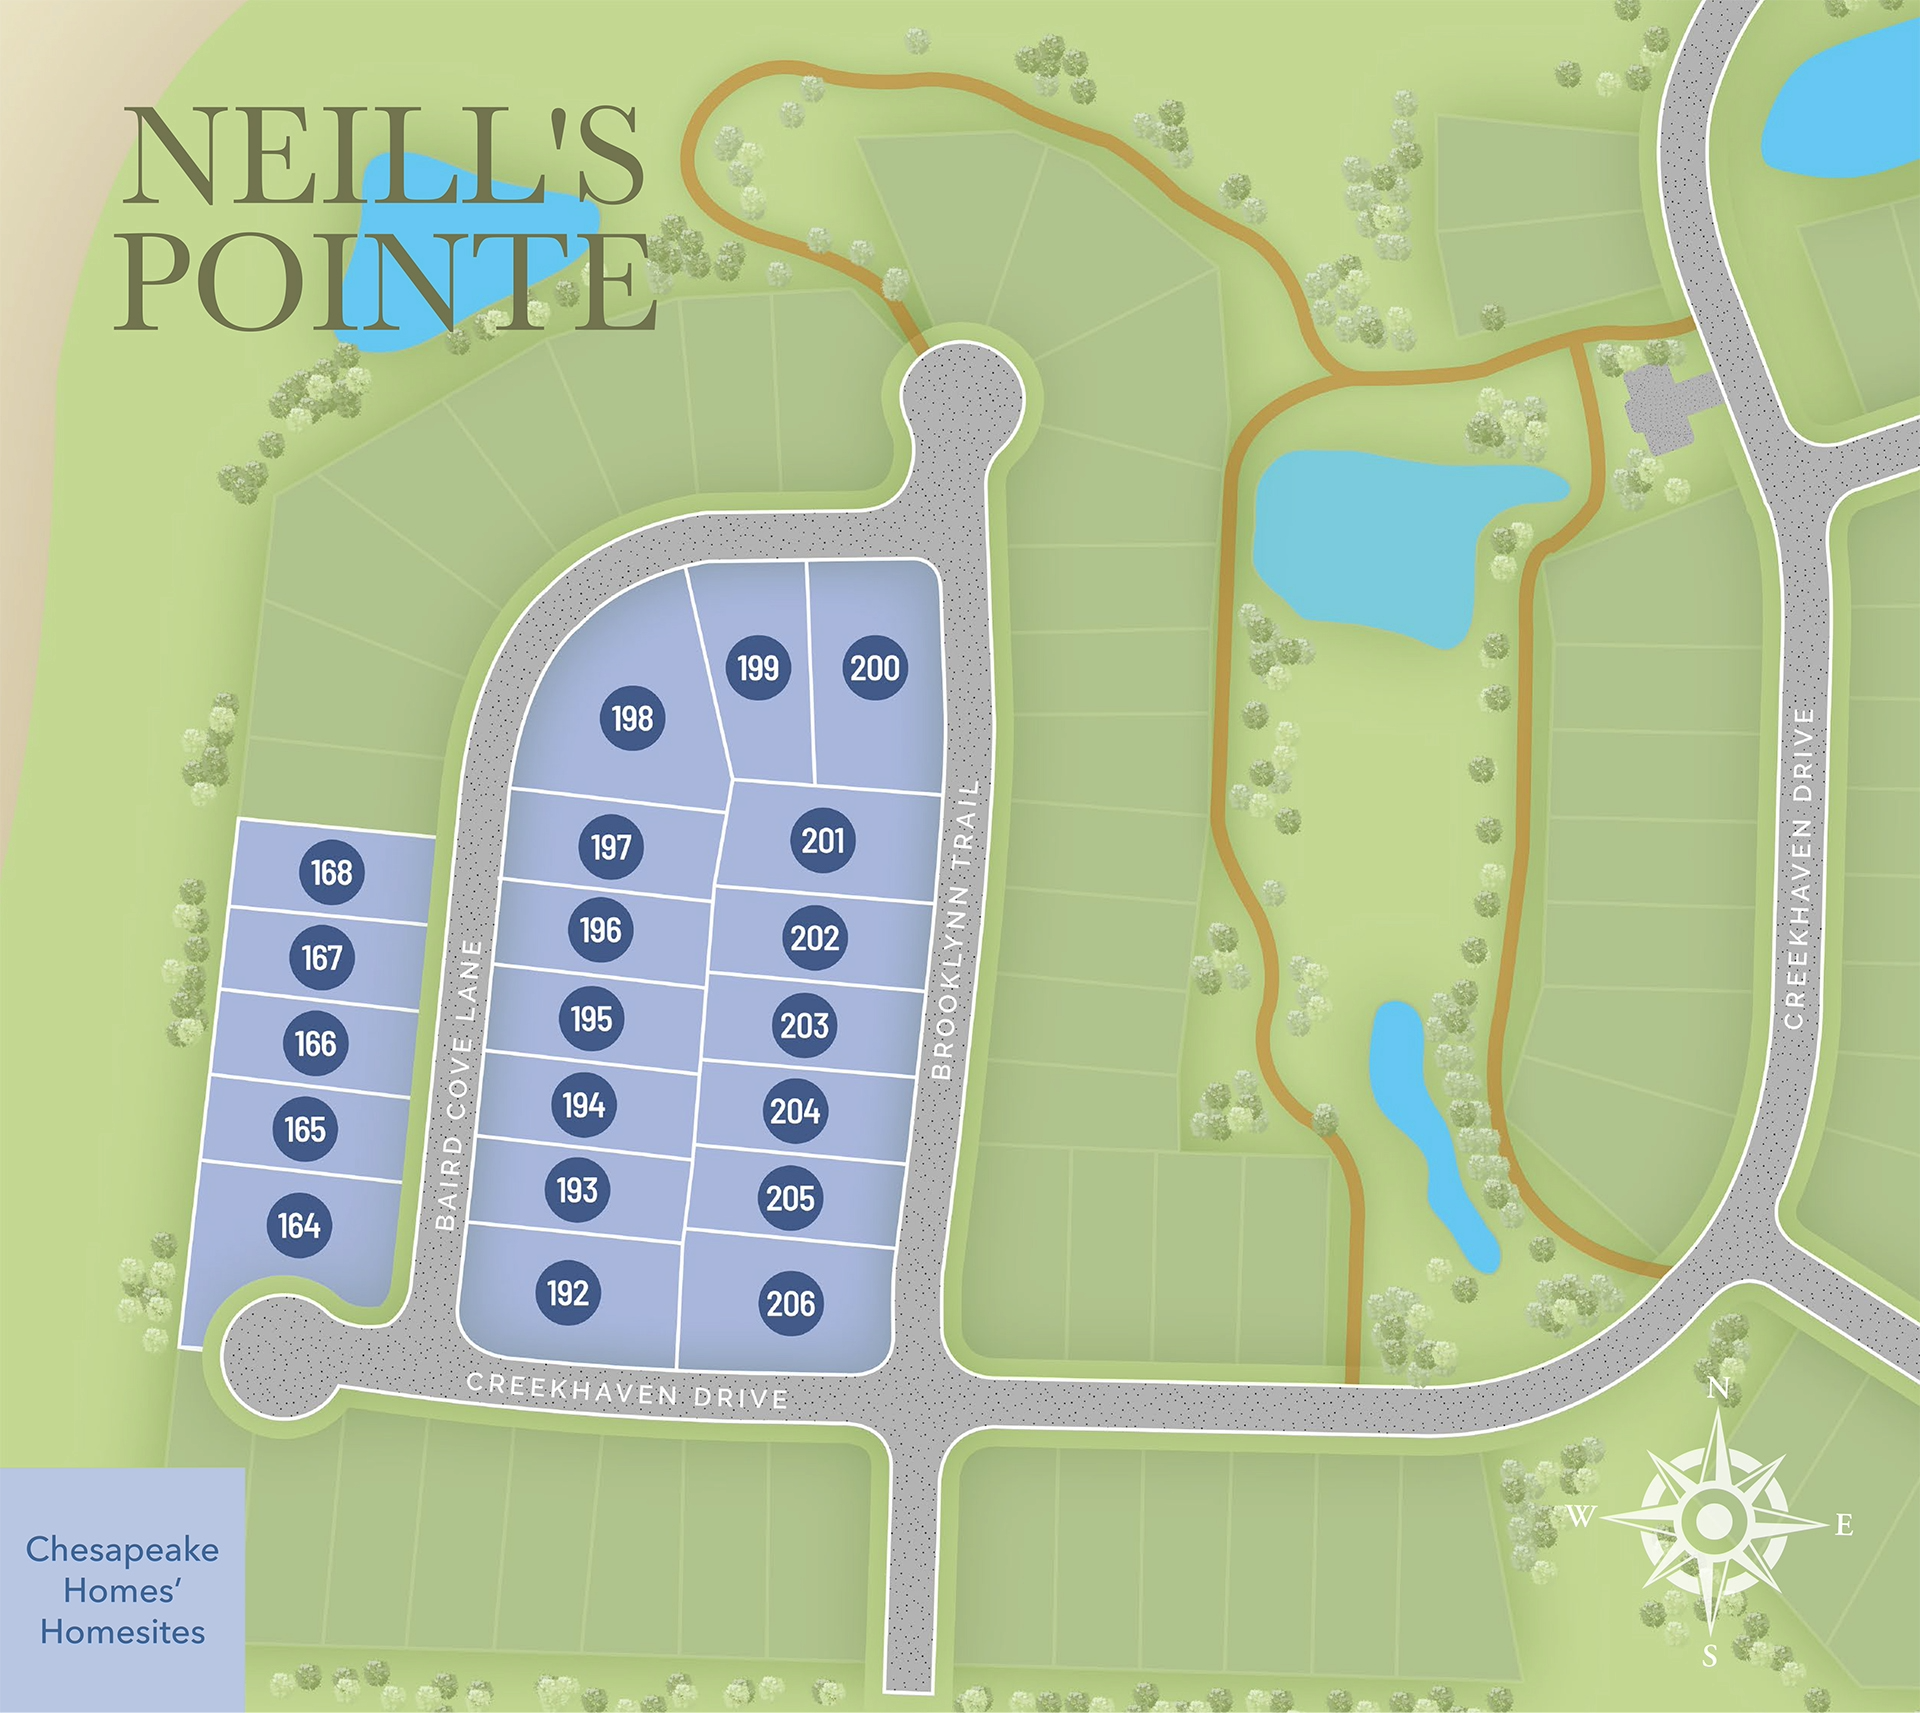 Angier, NC Neill's Pointe New Homes from Chesapeake